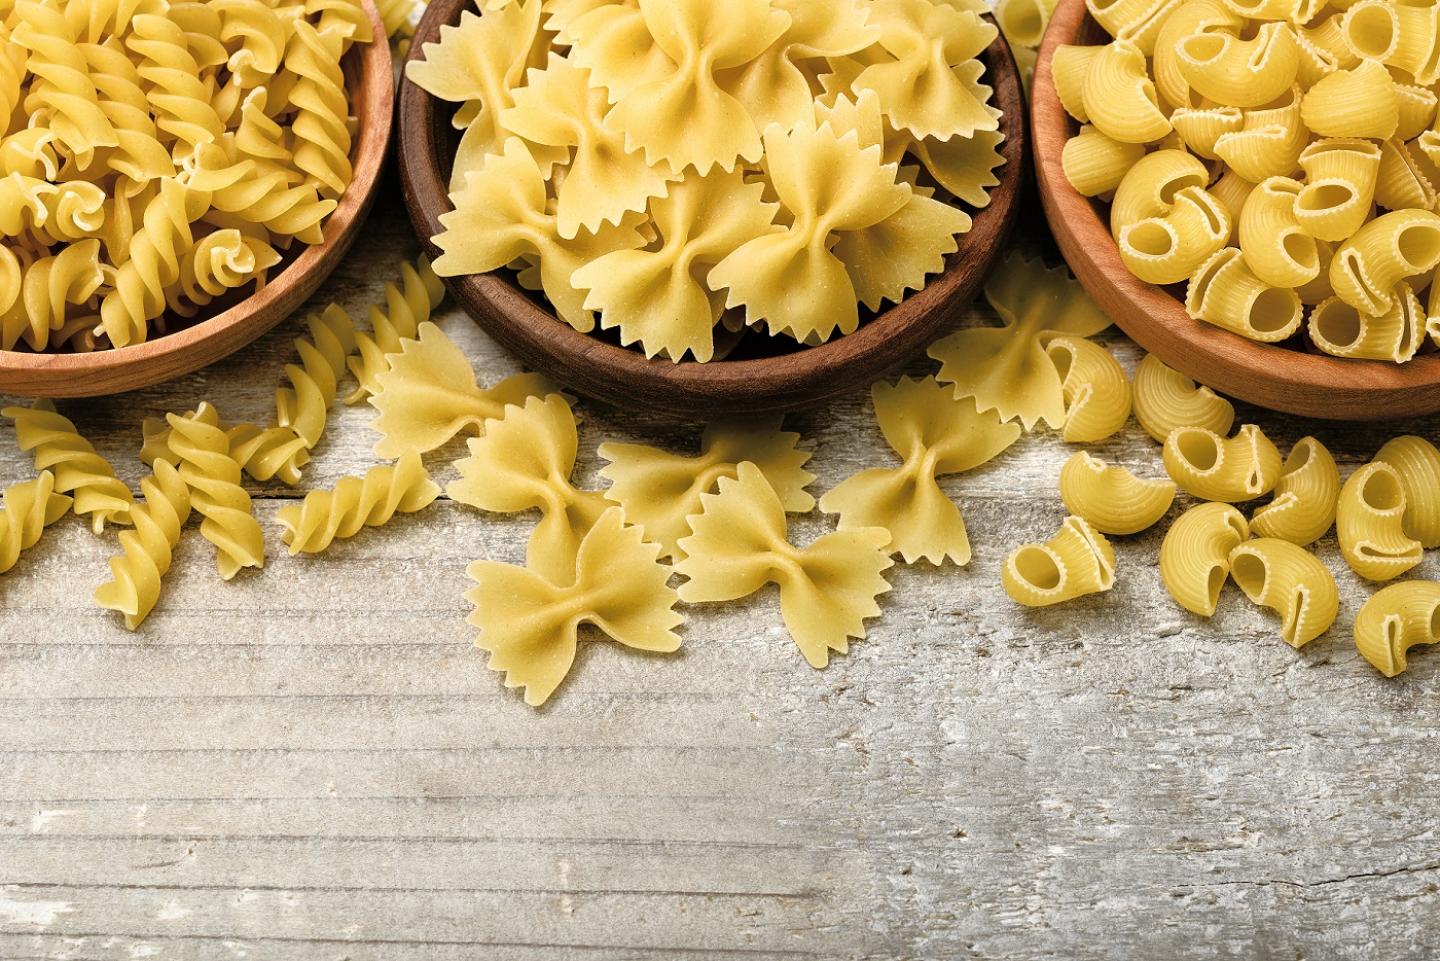 Bowls of rotini, farfalle and pippete dry pastas.